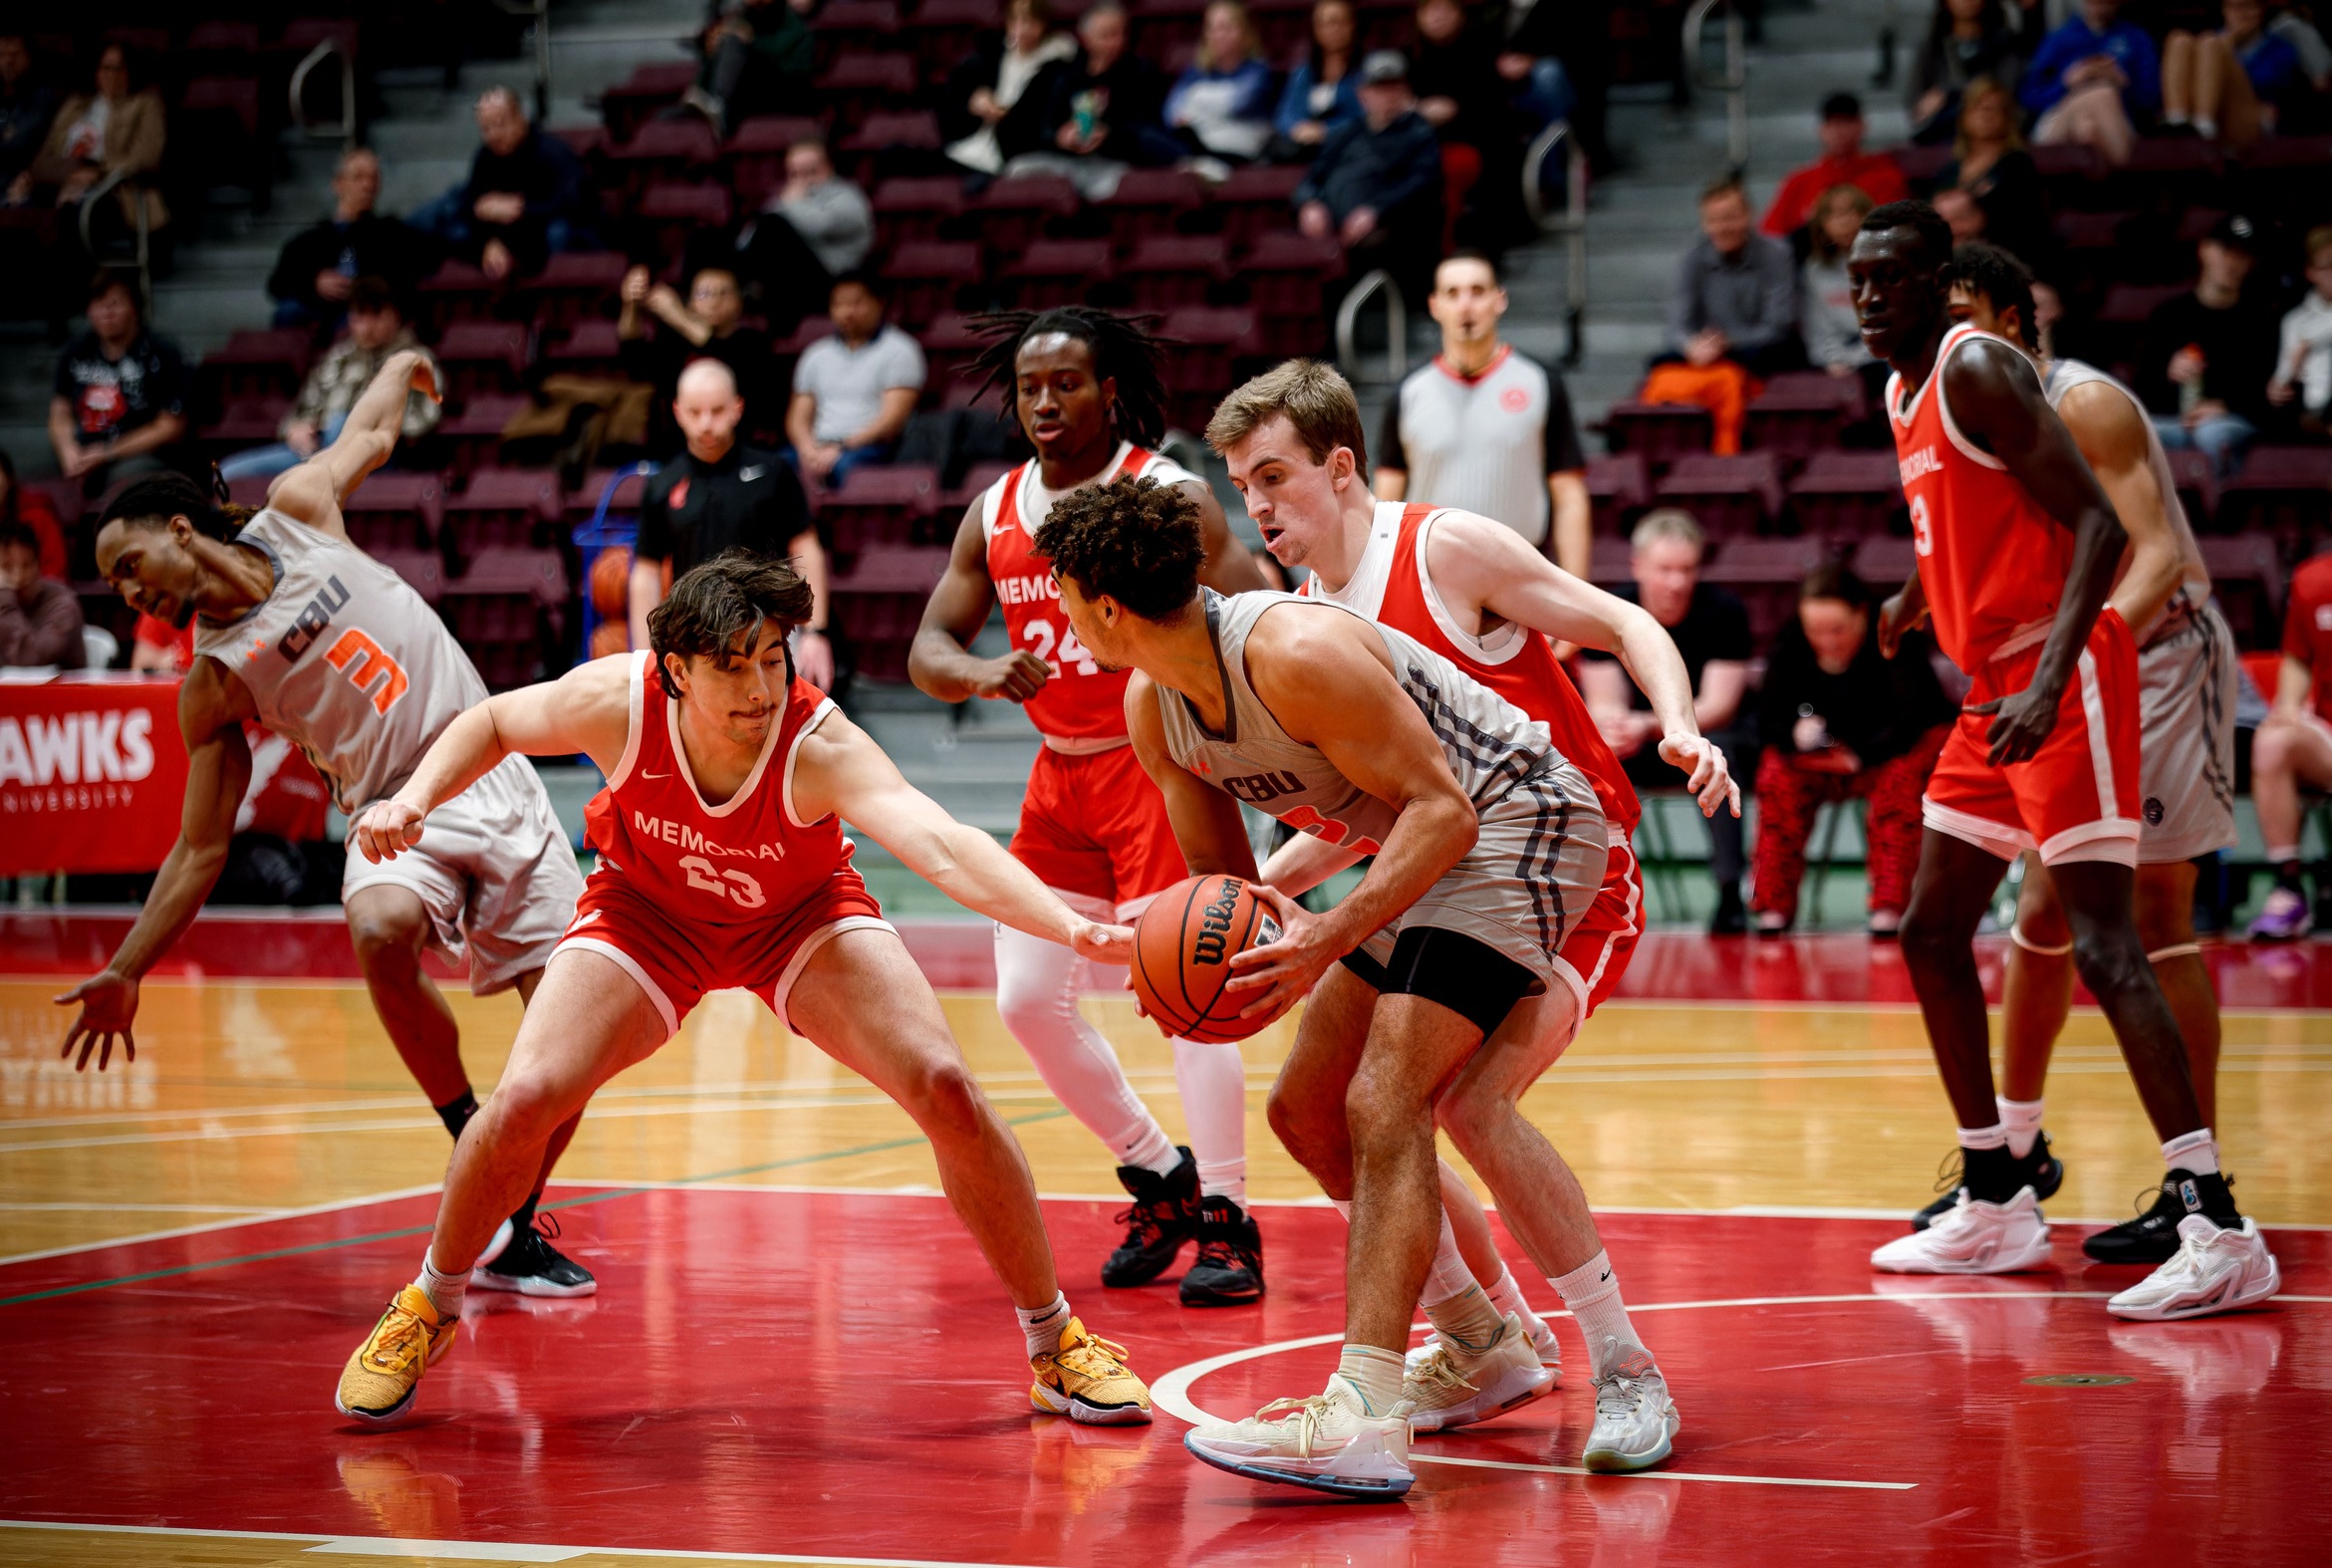 Sea-Hawks Finish Semester in First Place